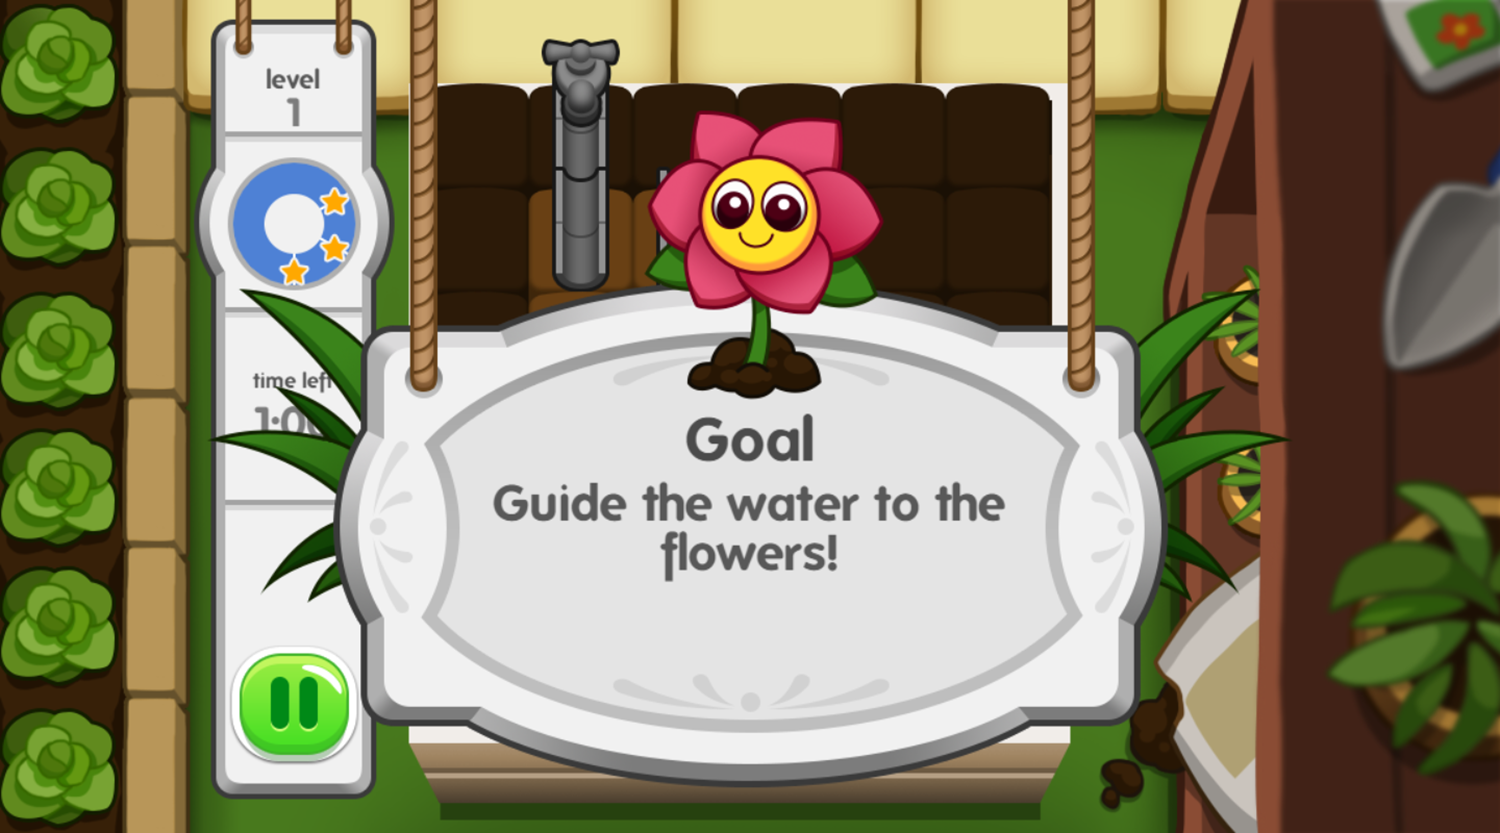 Daisy's Plumber Puzzle Game Goal Screenshot.